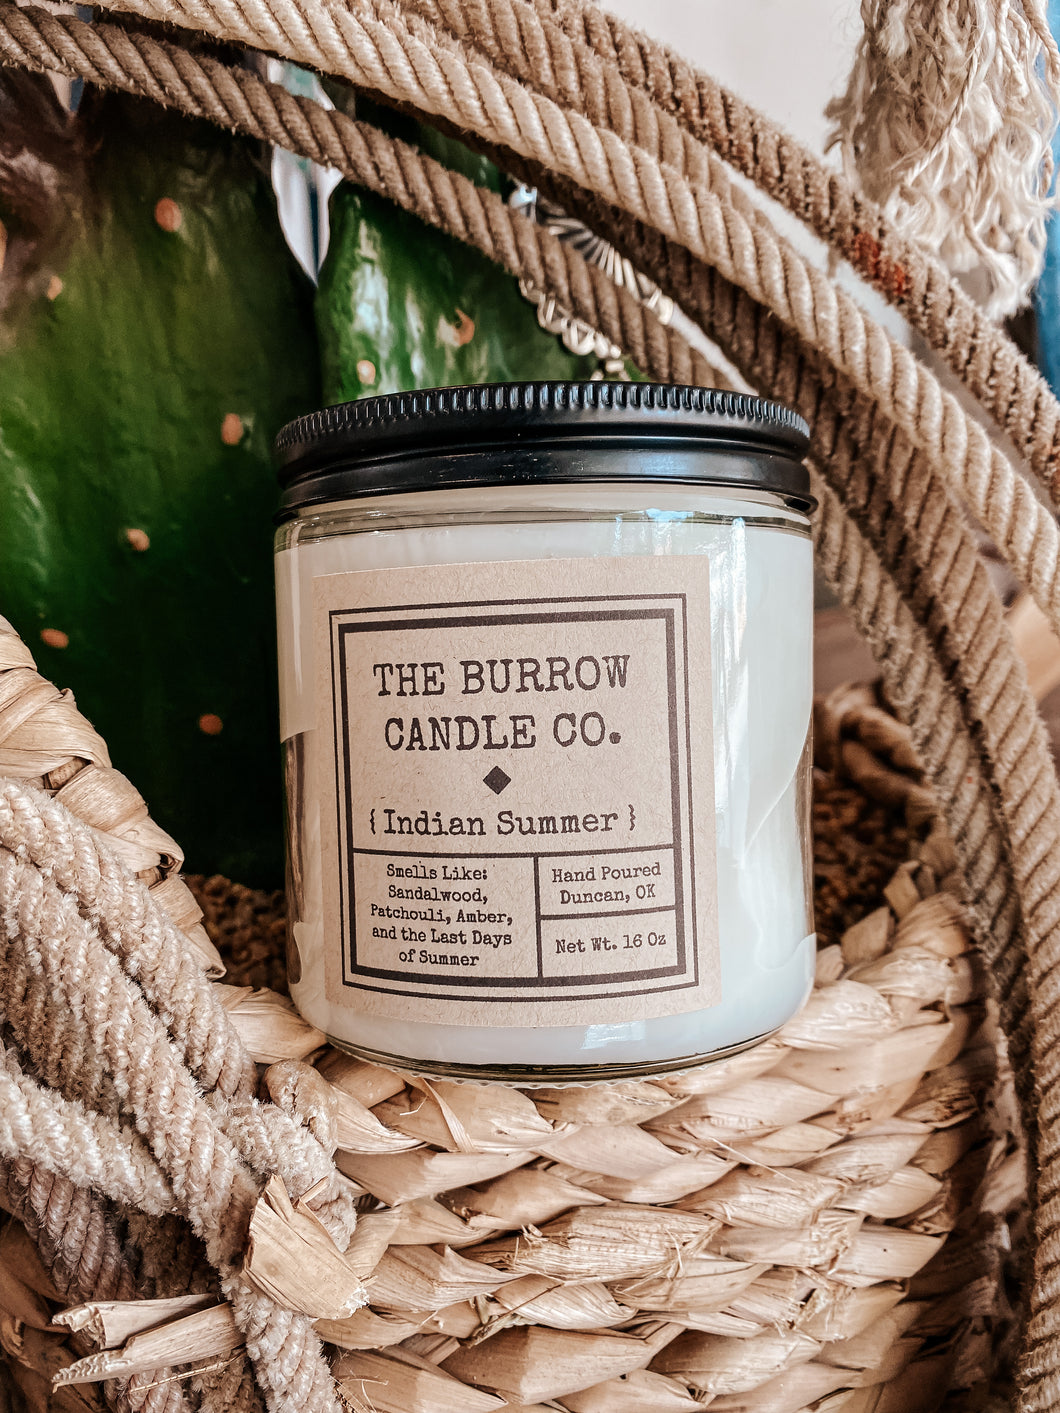 The Indian Summer Candle